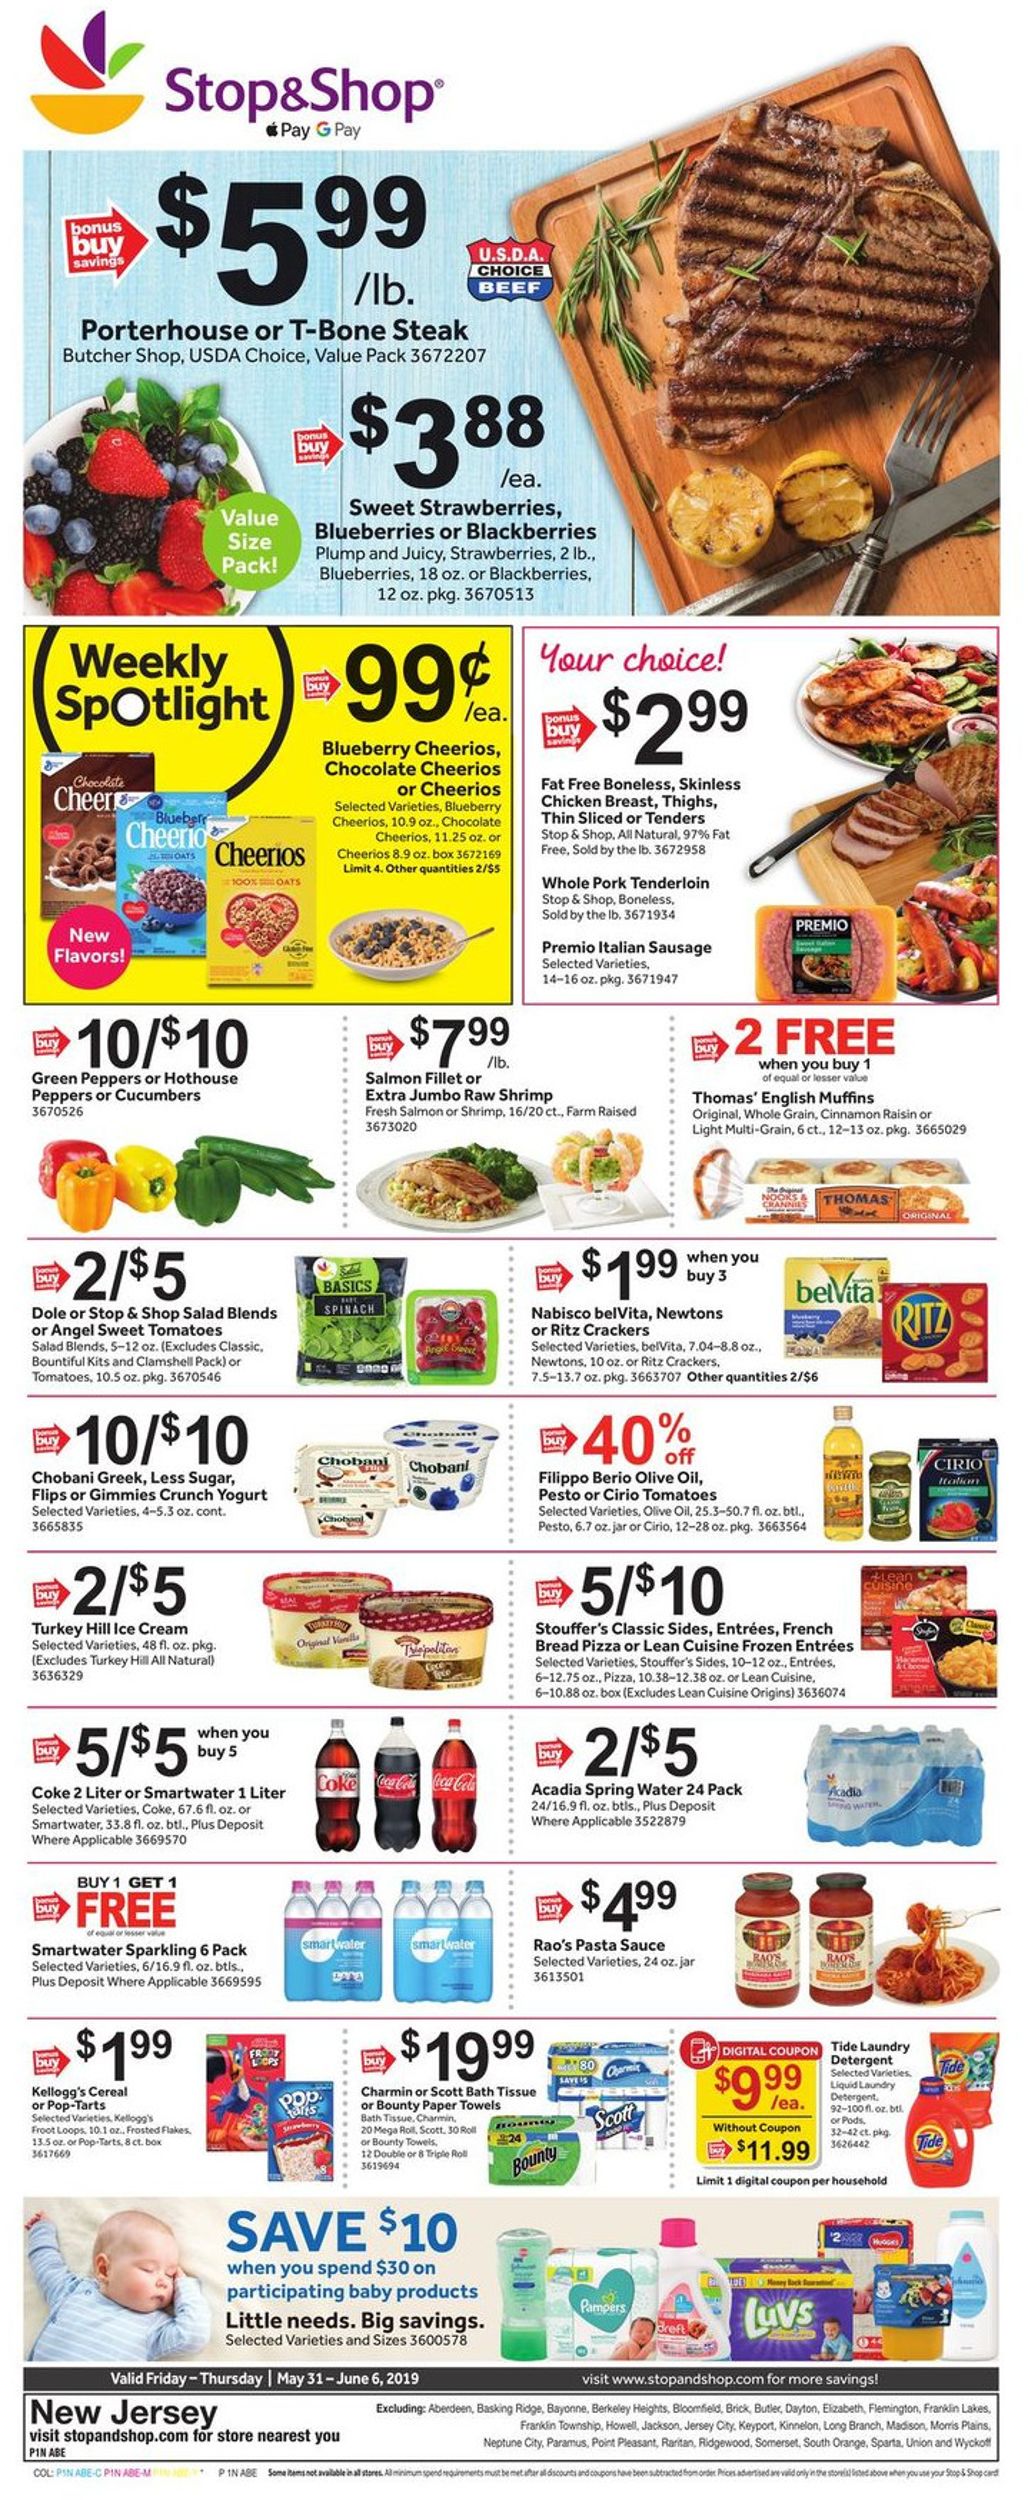 Stop and Shop Current weekly ad 05/31 - 06/06/2019 - frequent-ads.com